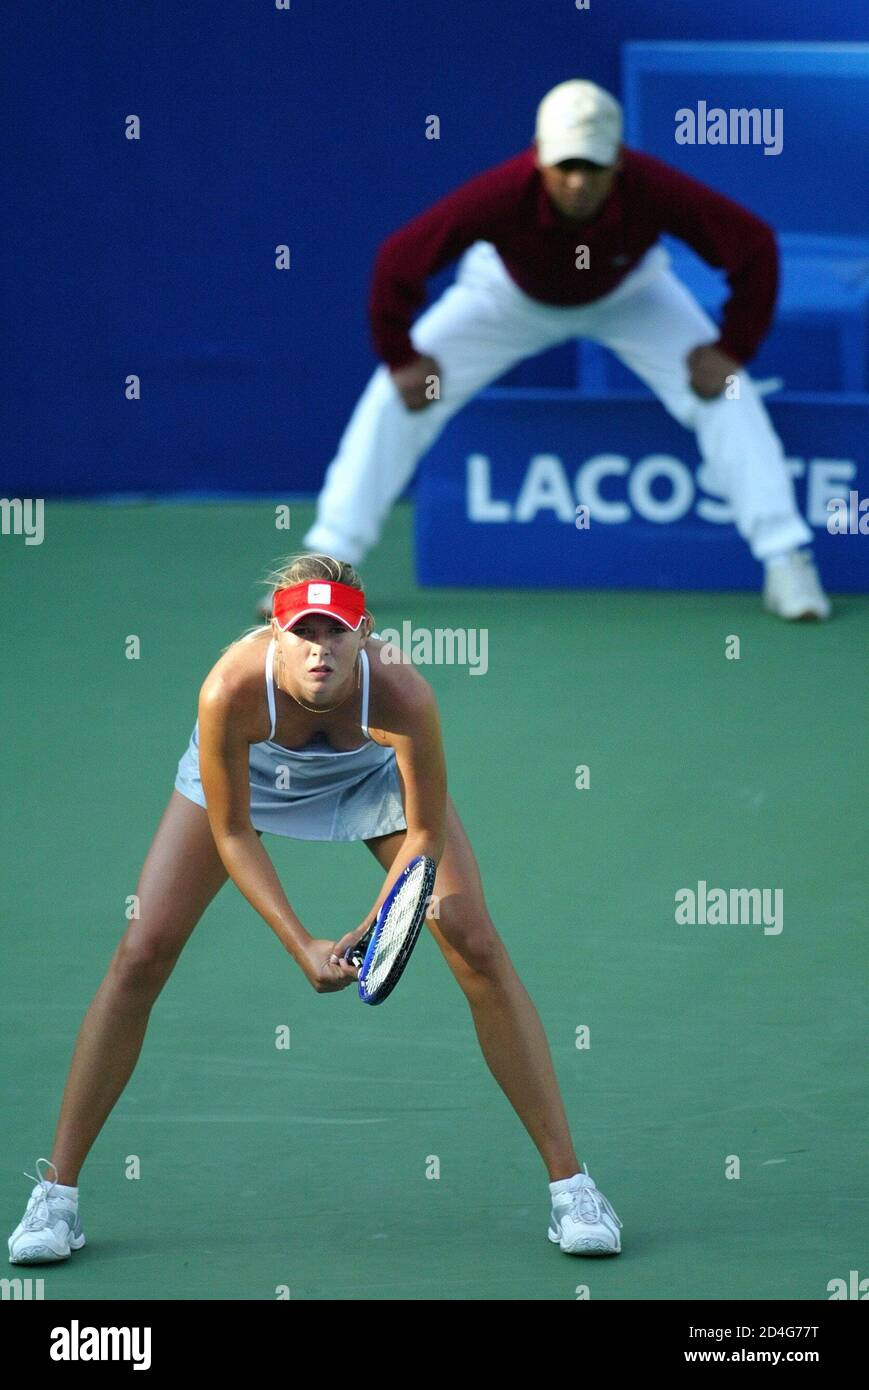 Russia's Wimbledon champion Maria Sharapova prepares to receive a serve from Svetlana Kuznetsova at China Open in Beijing.  Russia's Wimbledon champion Maria Sharapova prepares to receive a serve from U.S. Open champion compatriot Svetlana Kuznetsova during their semi-final match at the China Open tennis tournament in Beijing September 25, 2004. Kuznetsova won 6-2 6-2. REUTERS/Andrew Wong Pictures of the Month September 2004 Foto Stock